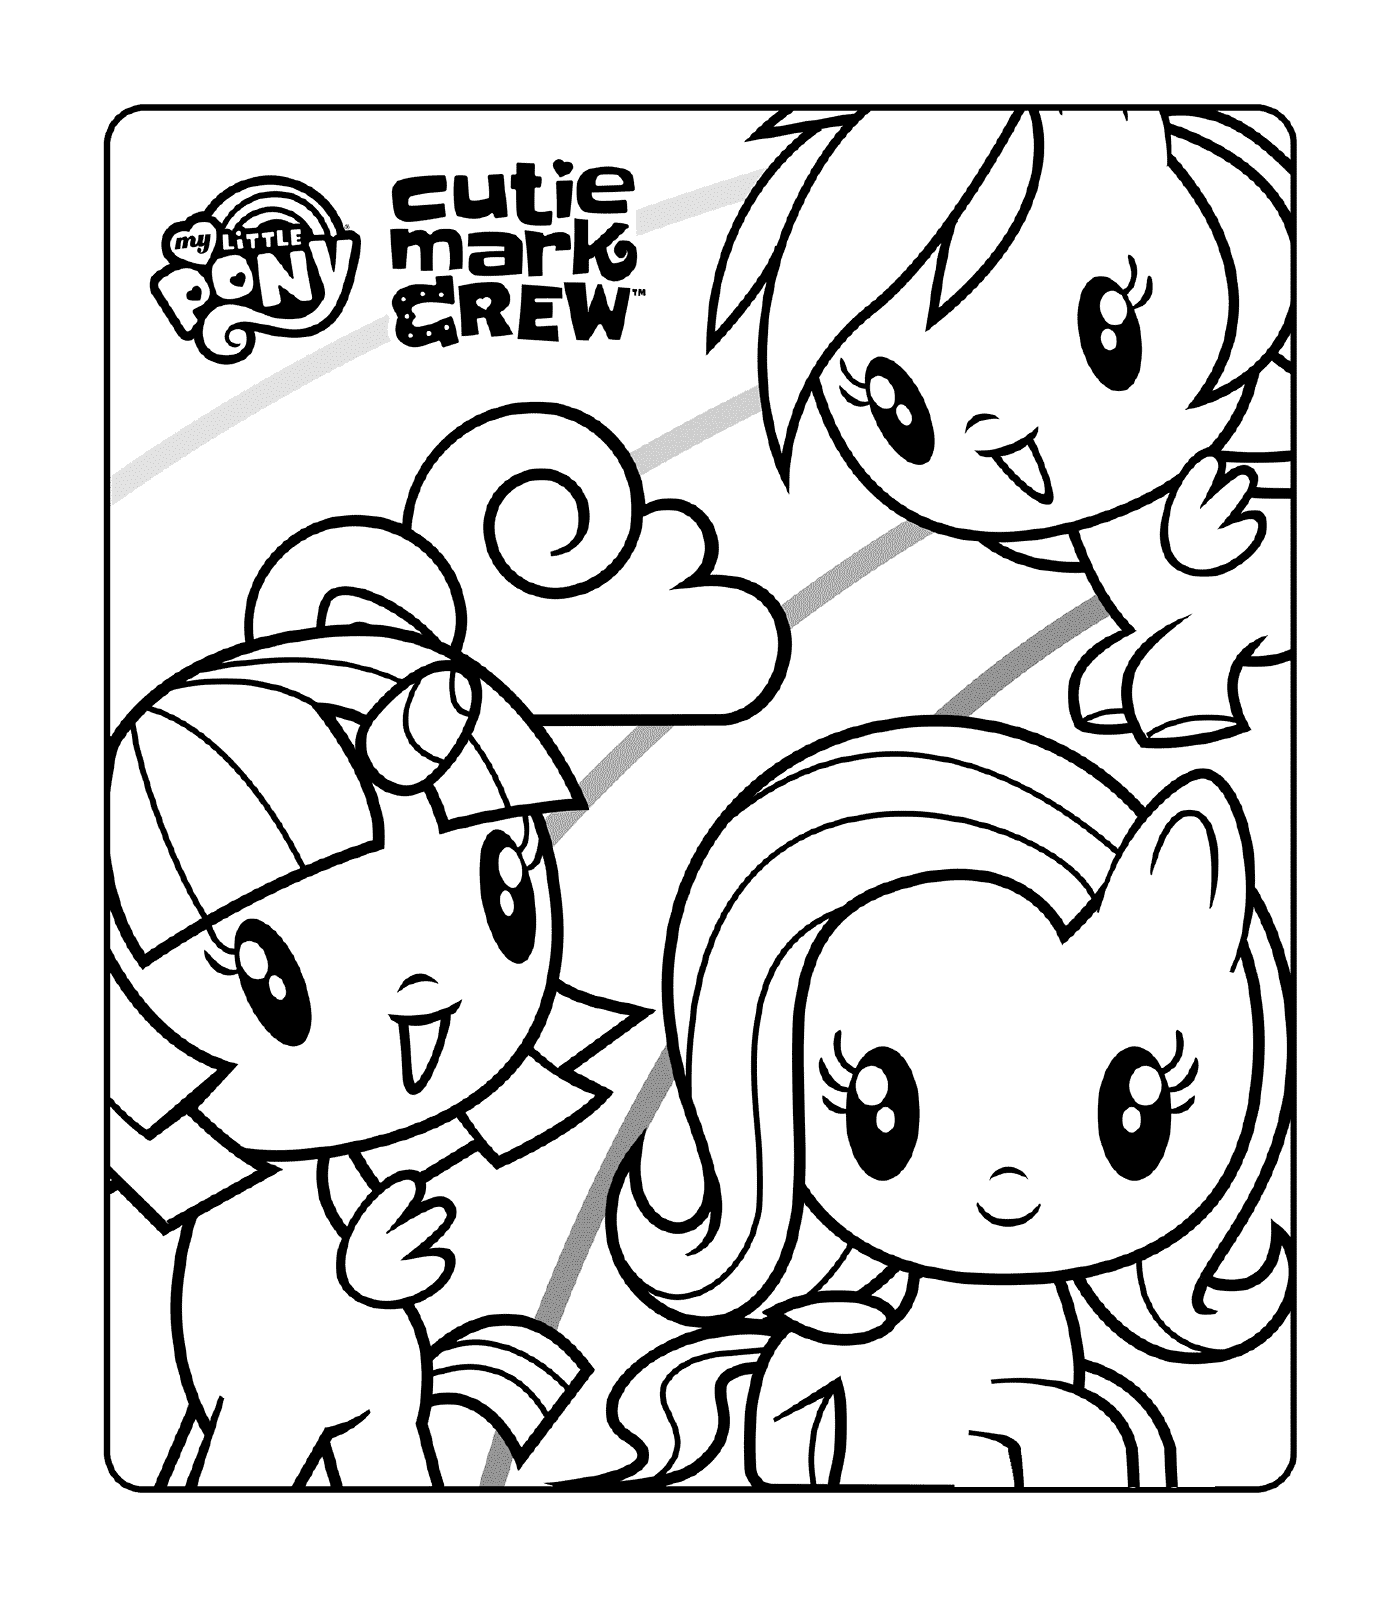  Group of Girls in the Cutie Mark Collection 